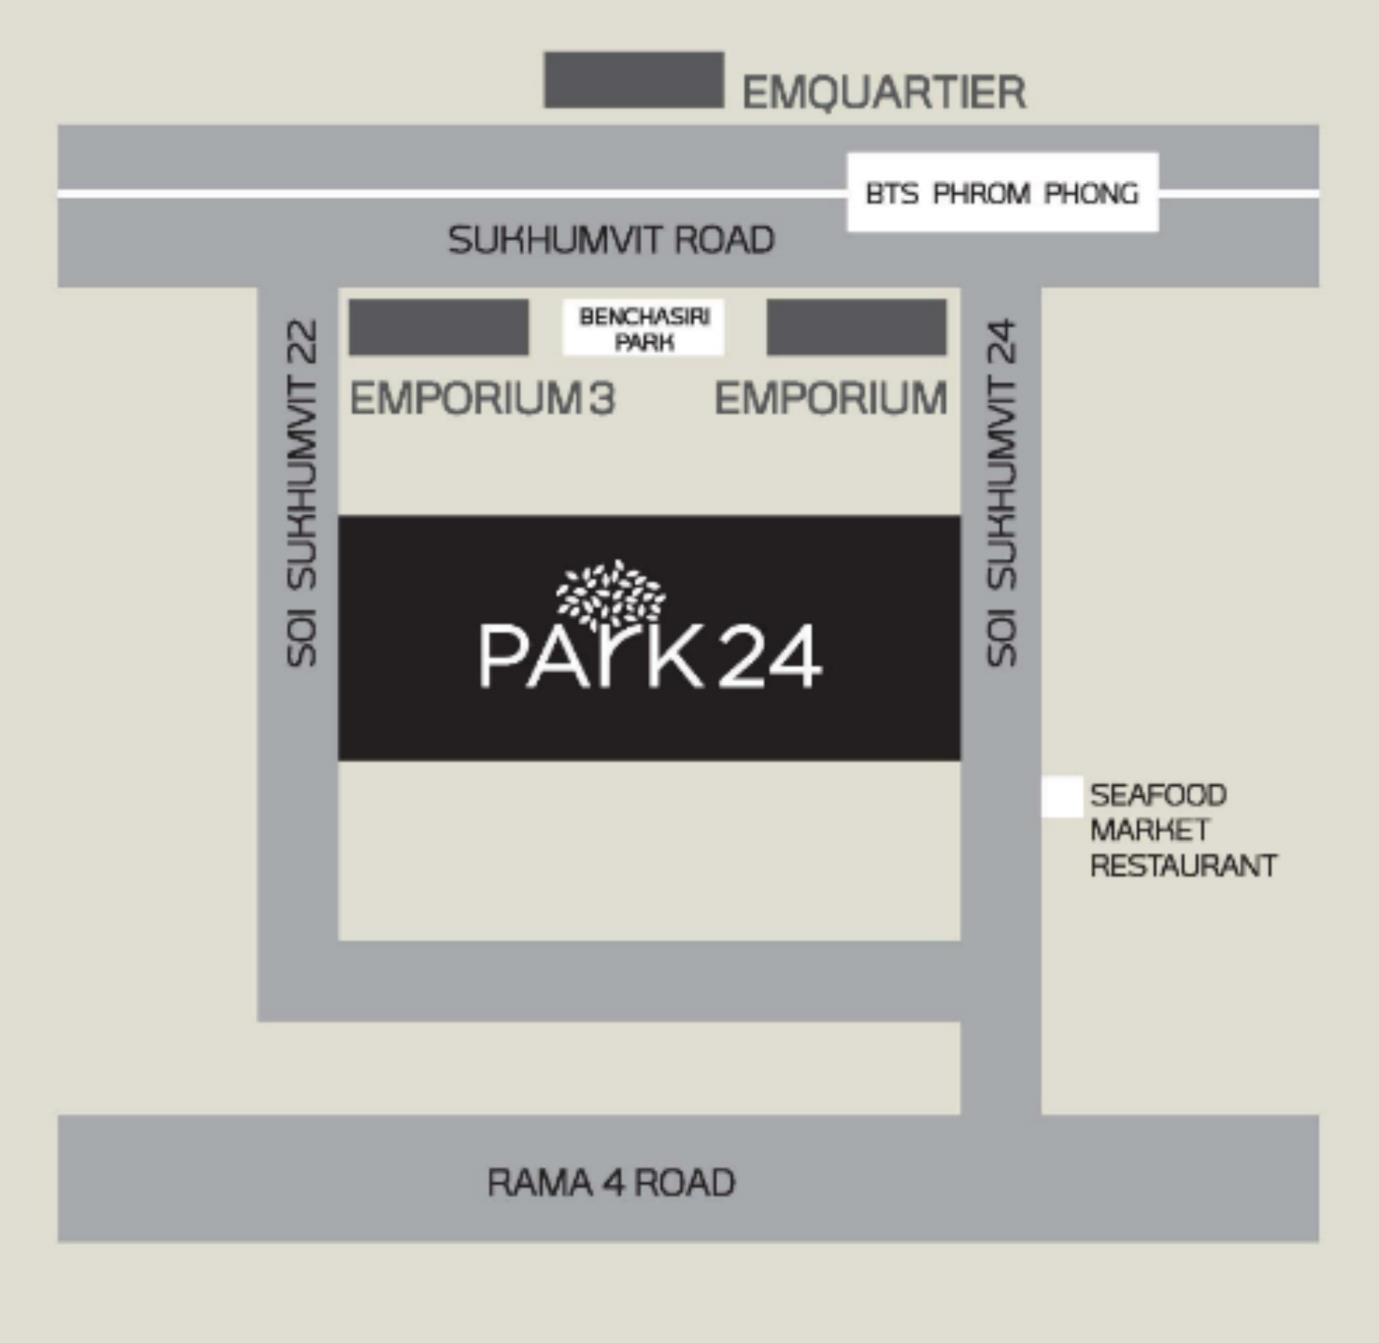 Park 24 by Origin Property. Located 500 metres from Phrom Phong BTS. Just behind Benchasiri Park next to Emporium and opposite The EM Quartier.